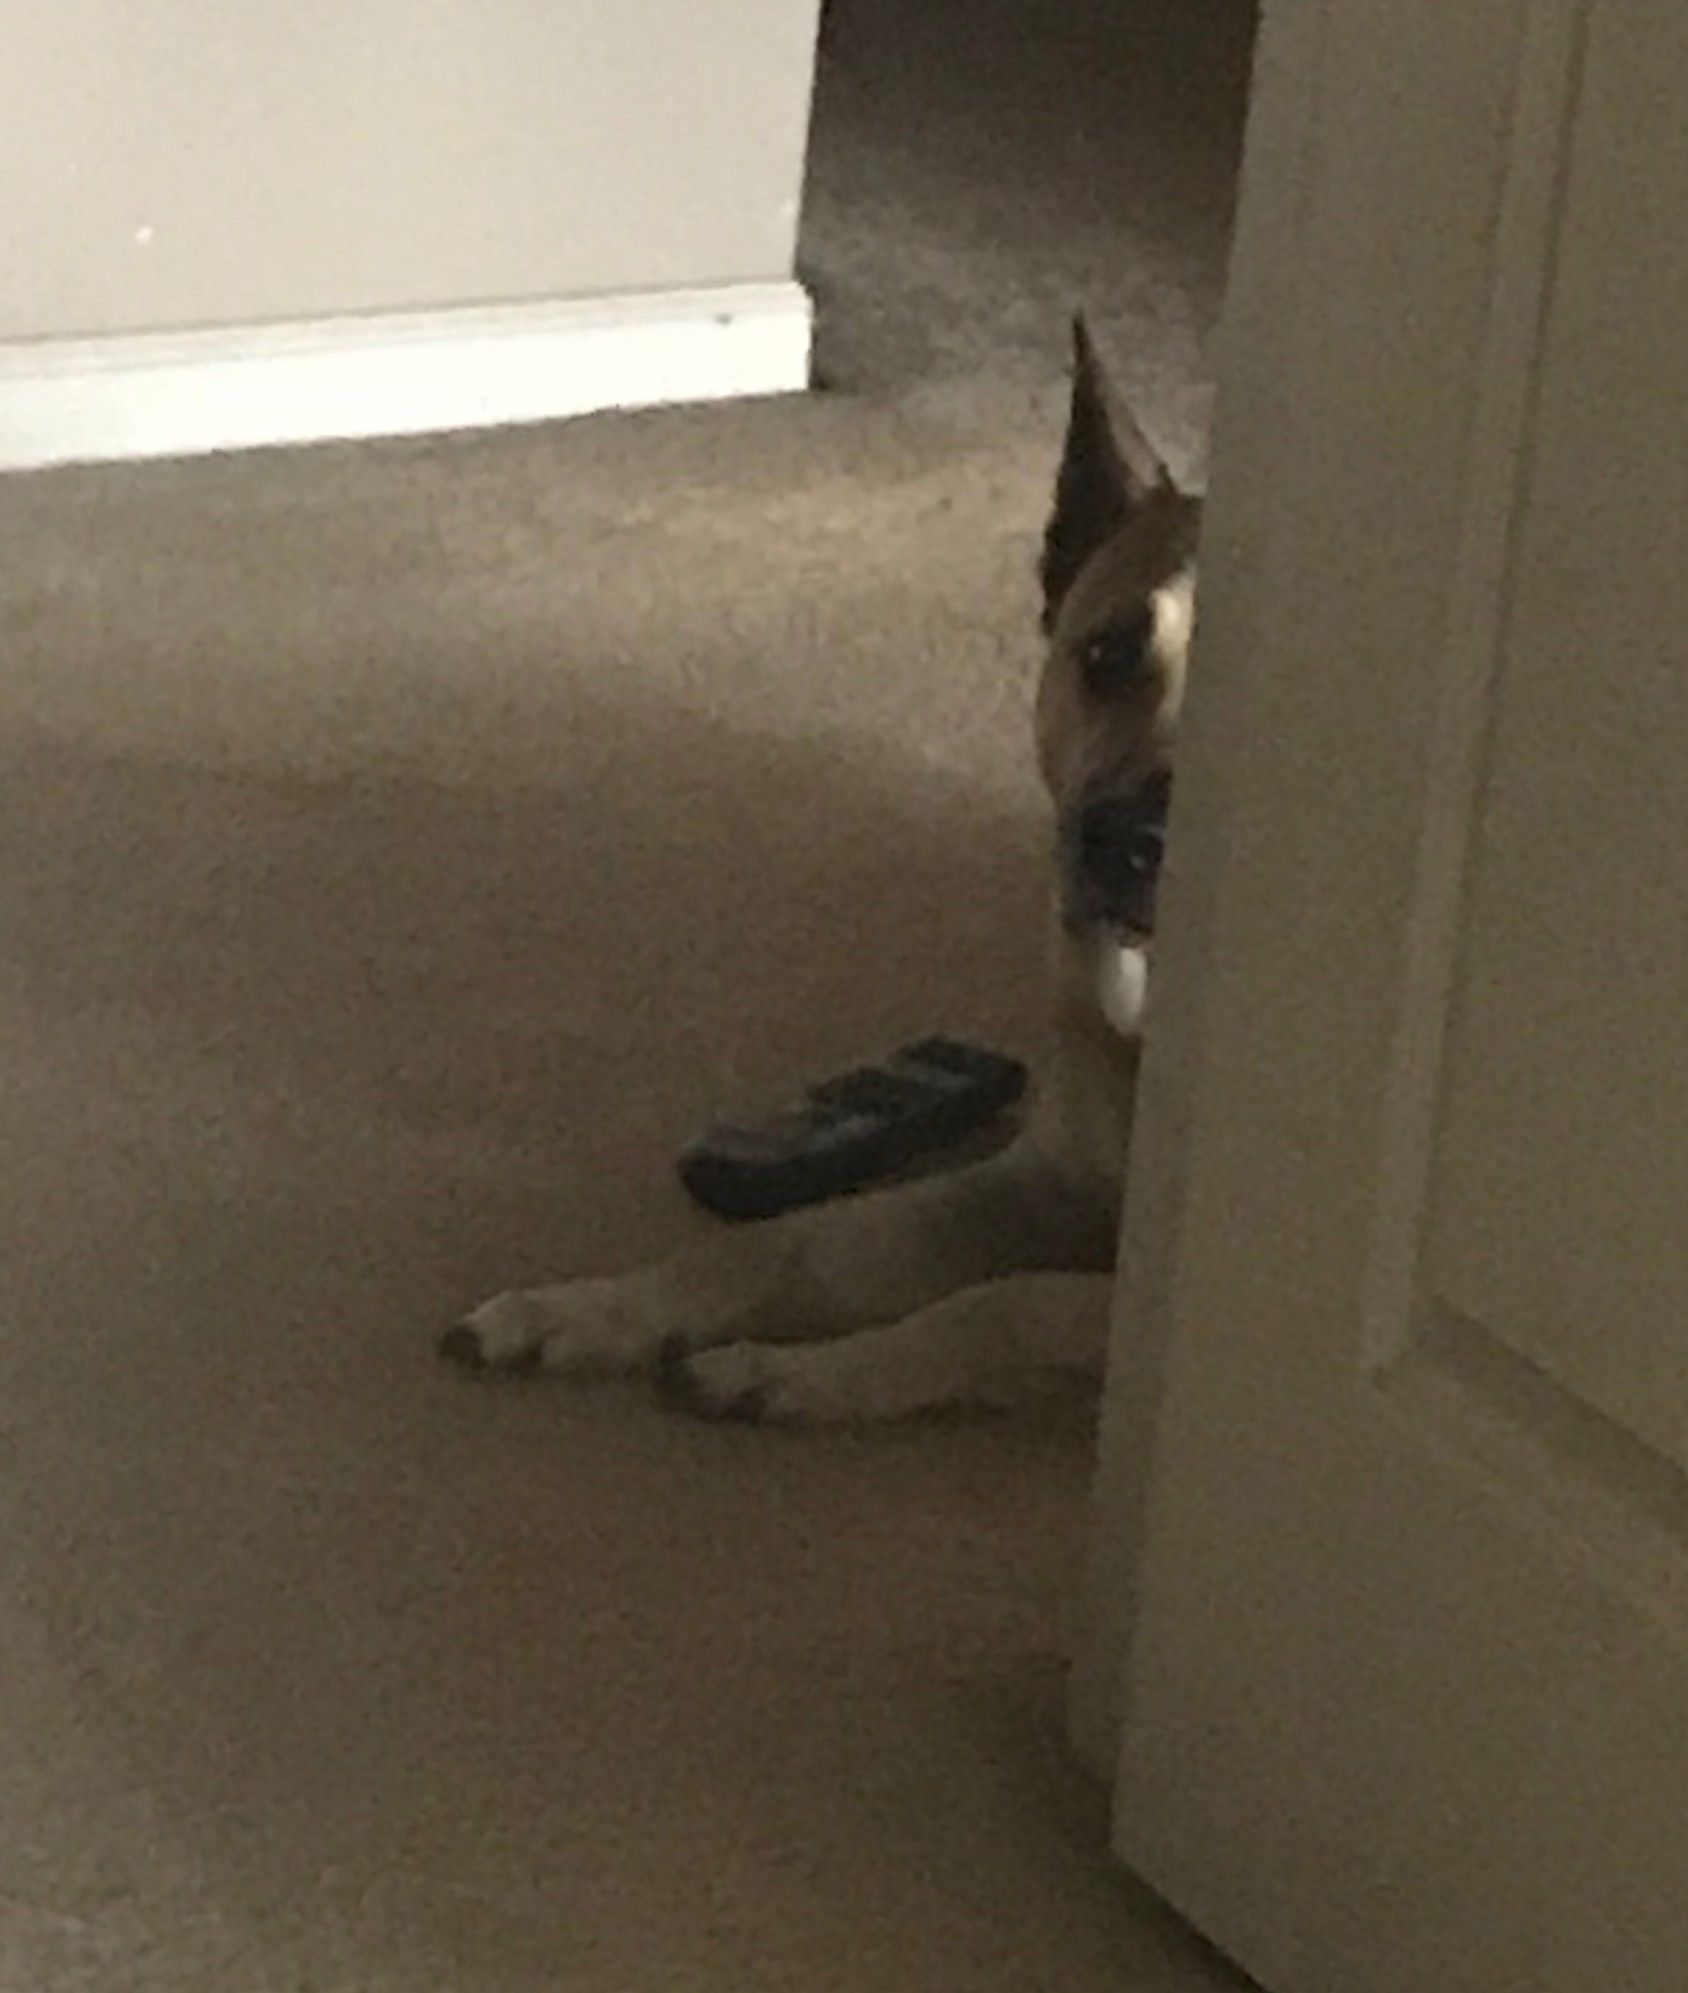 Little shit stole the remote and is waiting for my dad to chase him.